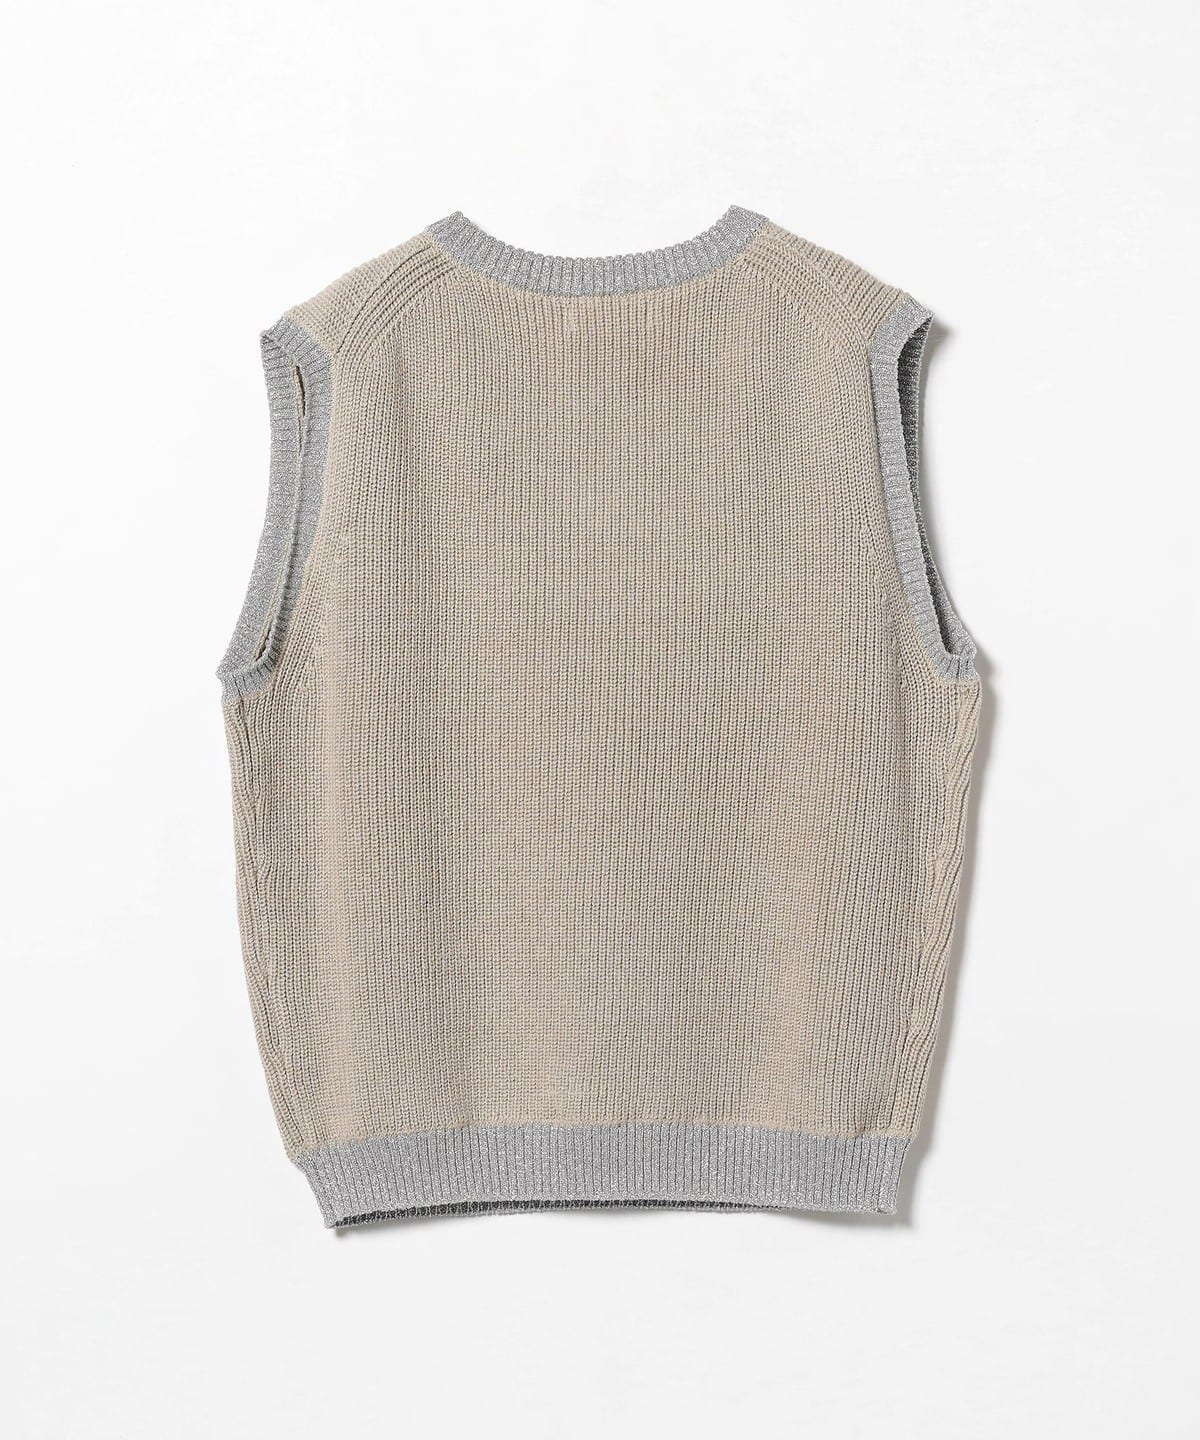 BEAMS（ビームス）TTTMSW / Lame knit vest（トップス ベスト 